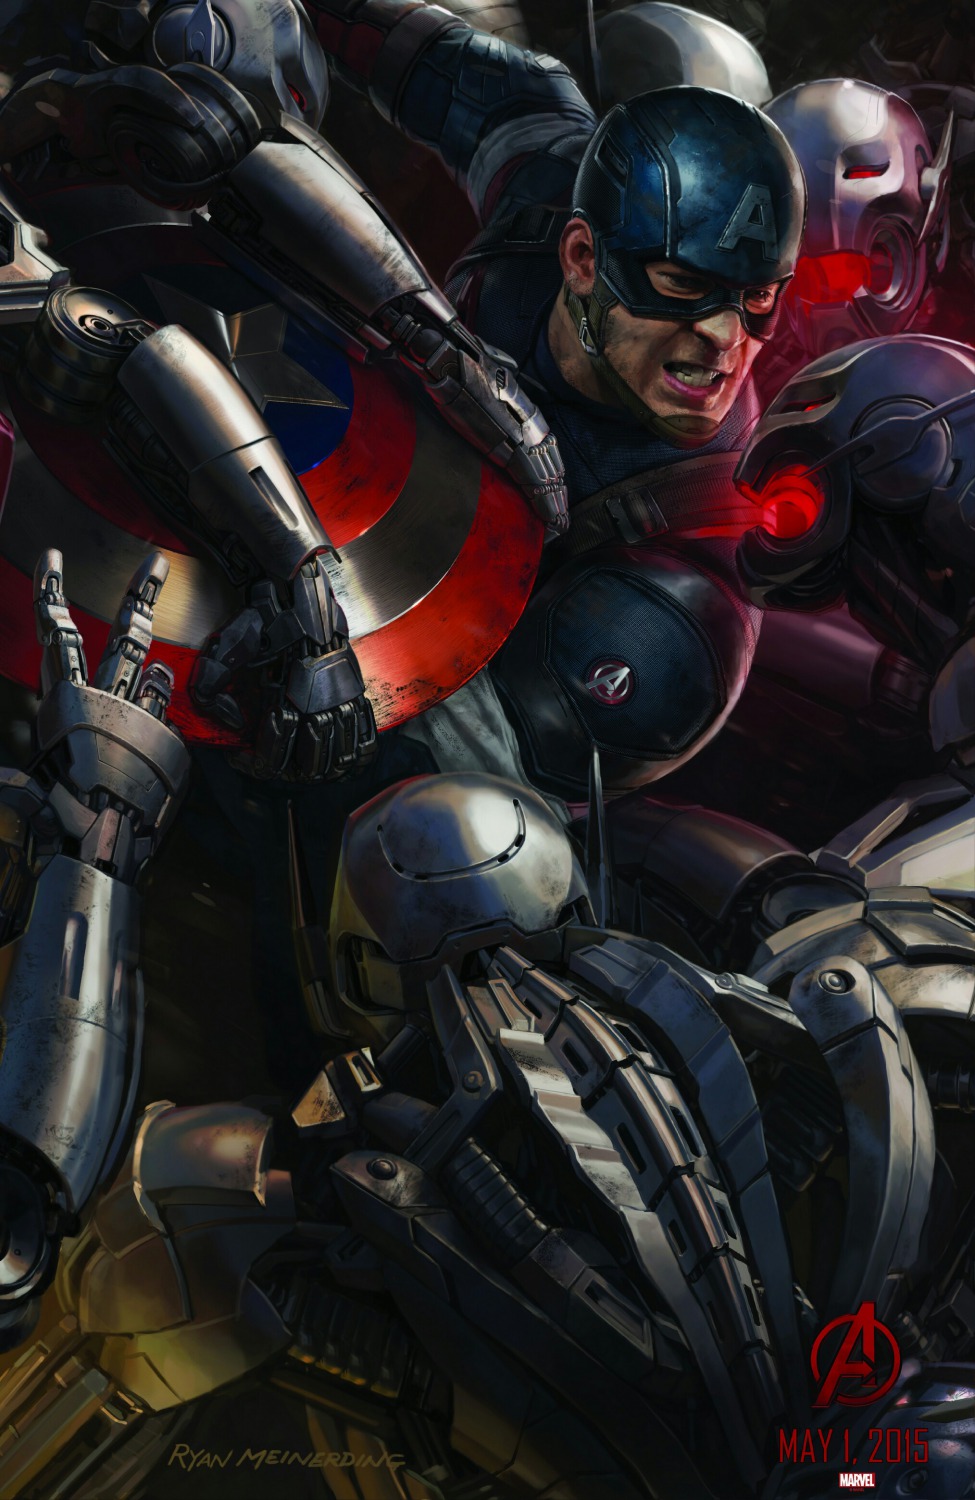 Extra Large Movie Poster Image for Avengers: Age of Ultron (#7 of 36)